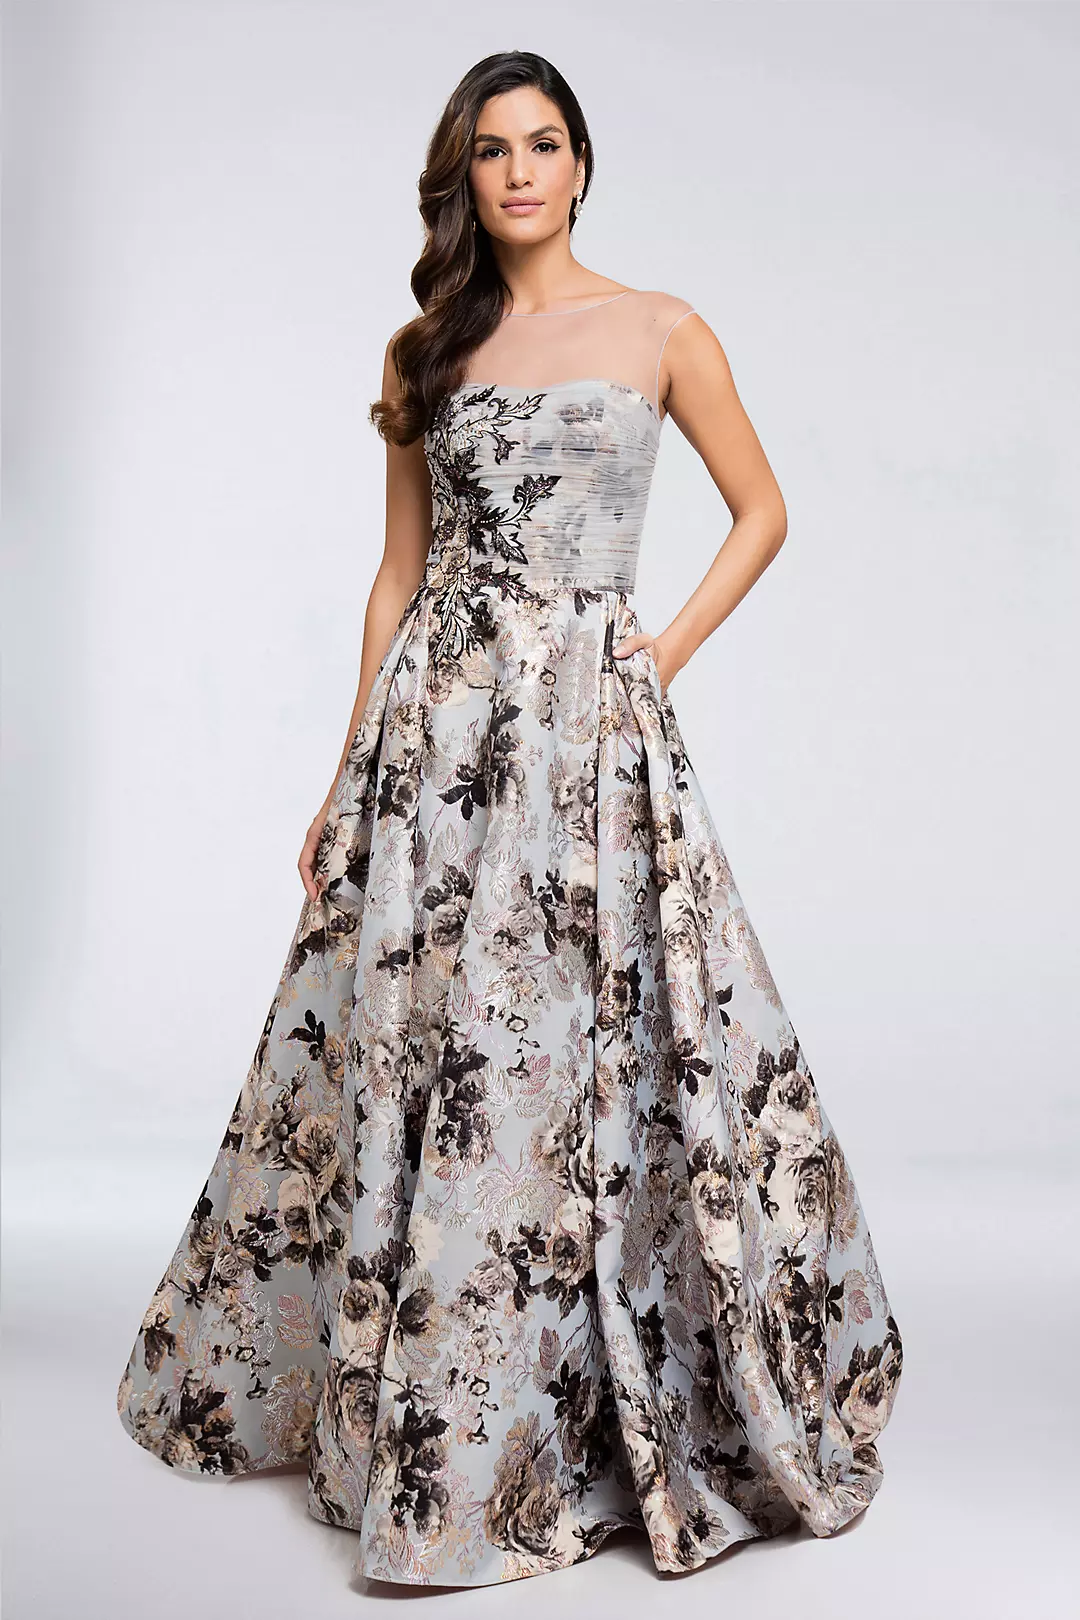 Embellished Brocade Illusion Neckline Ball Gown Image